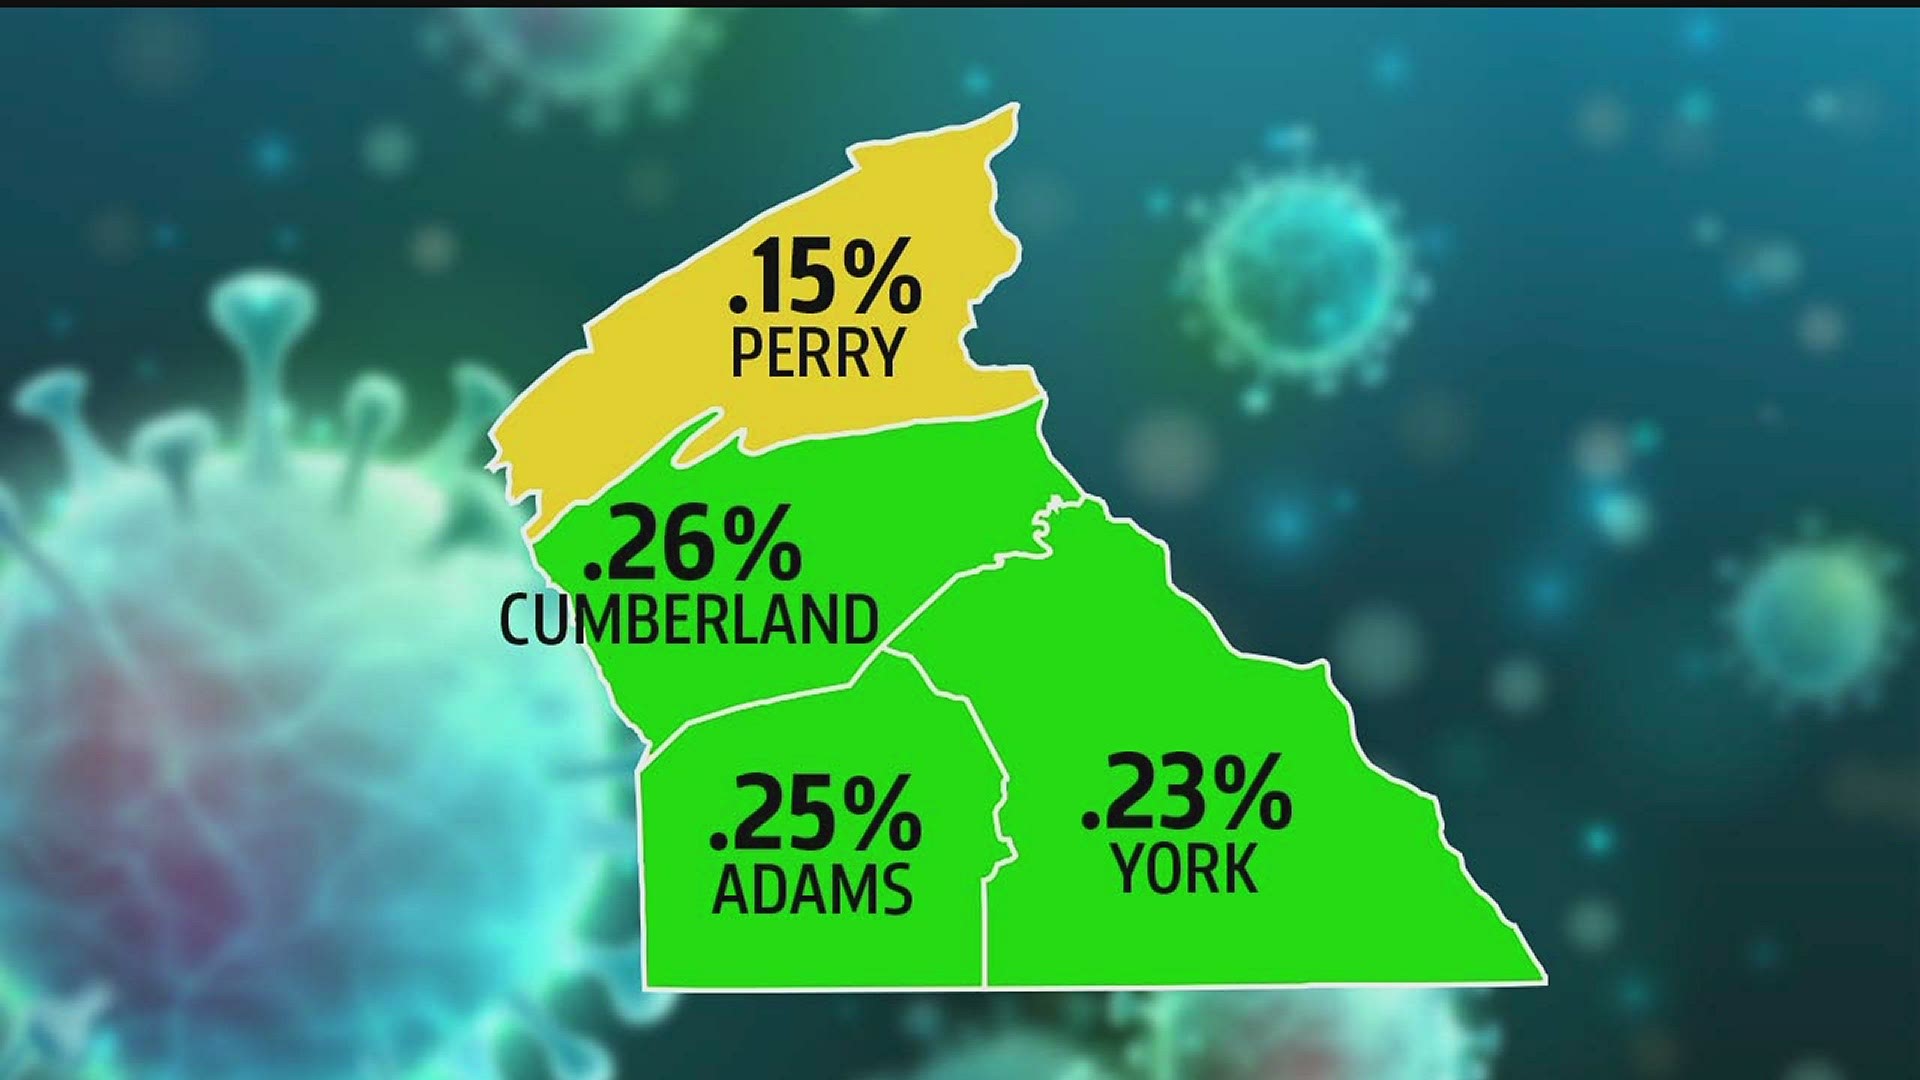 A county with one of the lowest case counts in central PA will not be moving into the green phrase on Friday, June 12th. Here's why: